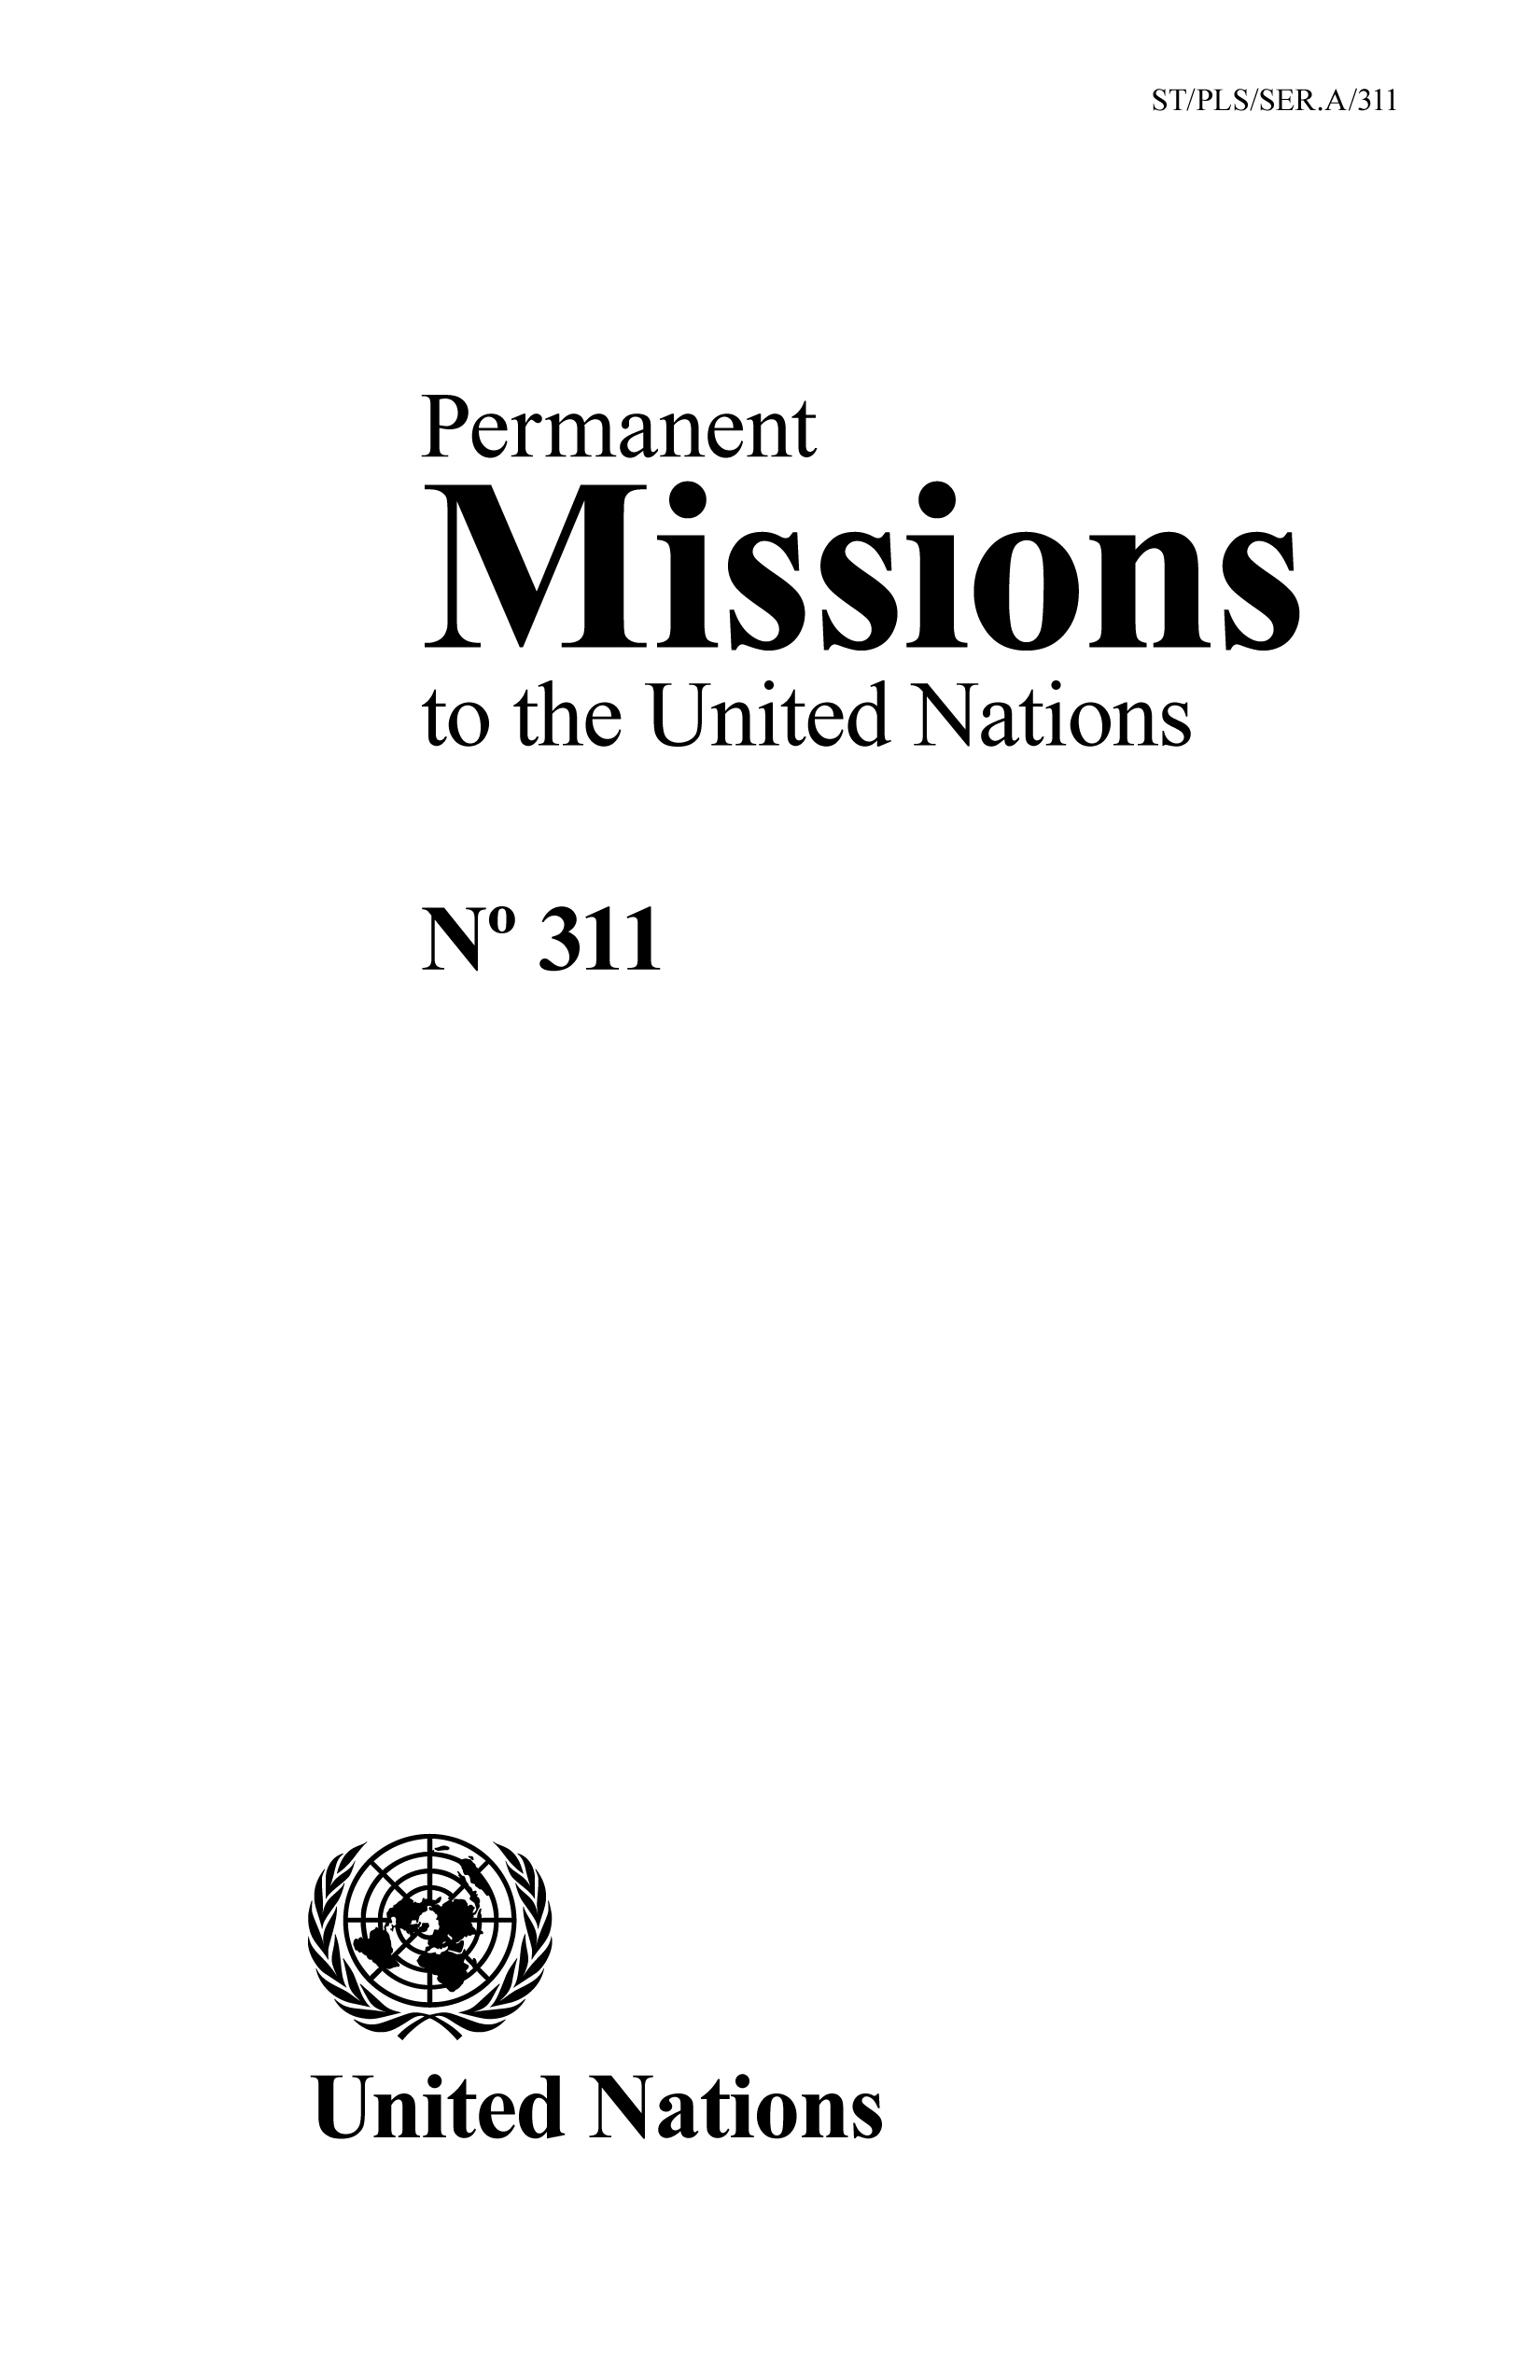 image of Permanent Missions to the United Nations, No. 311